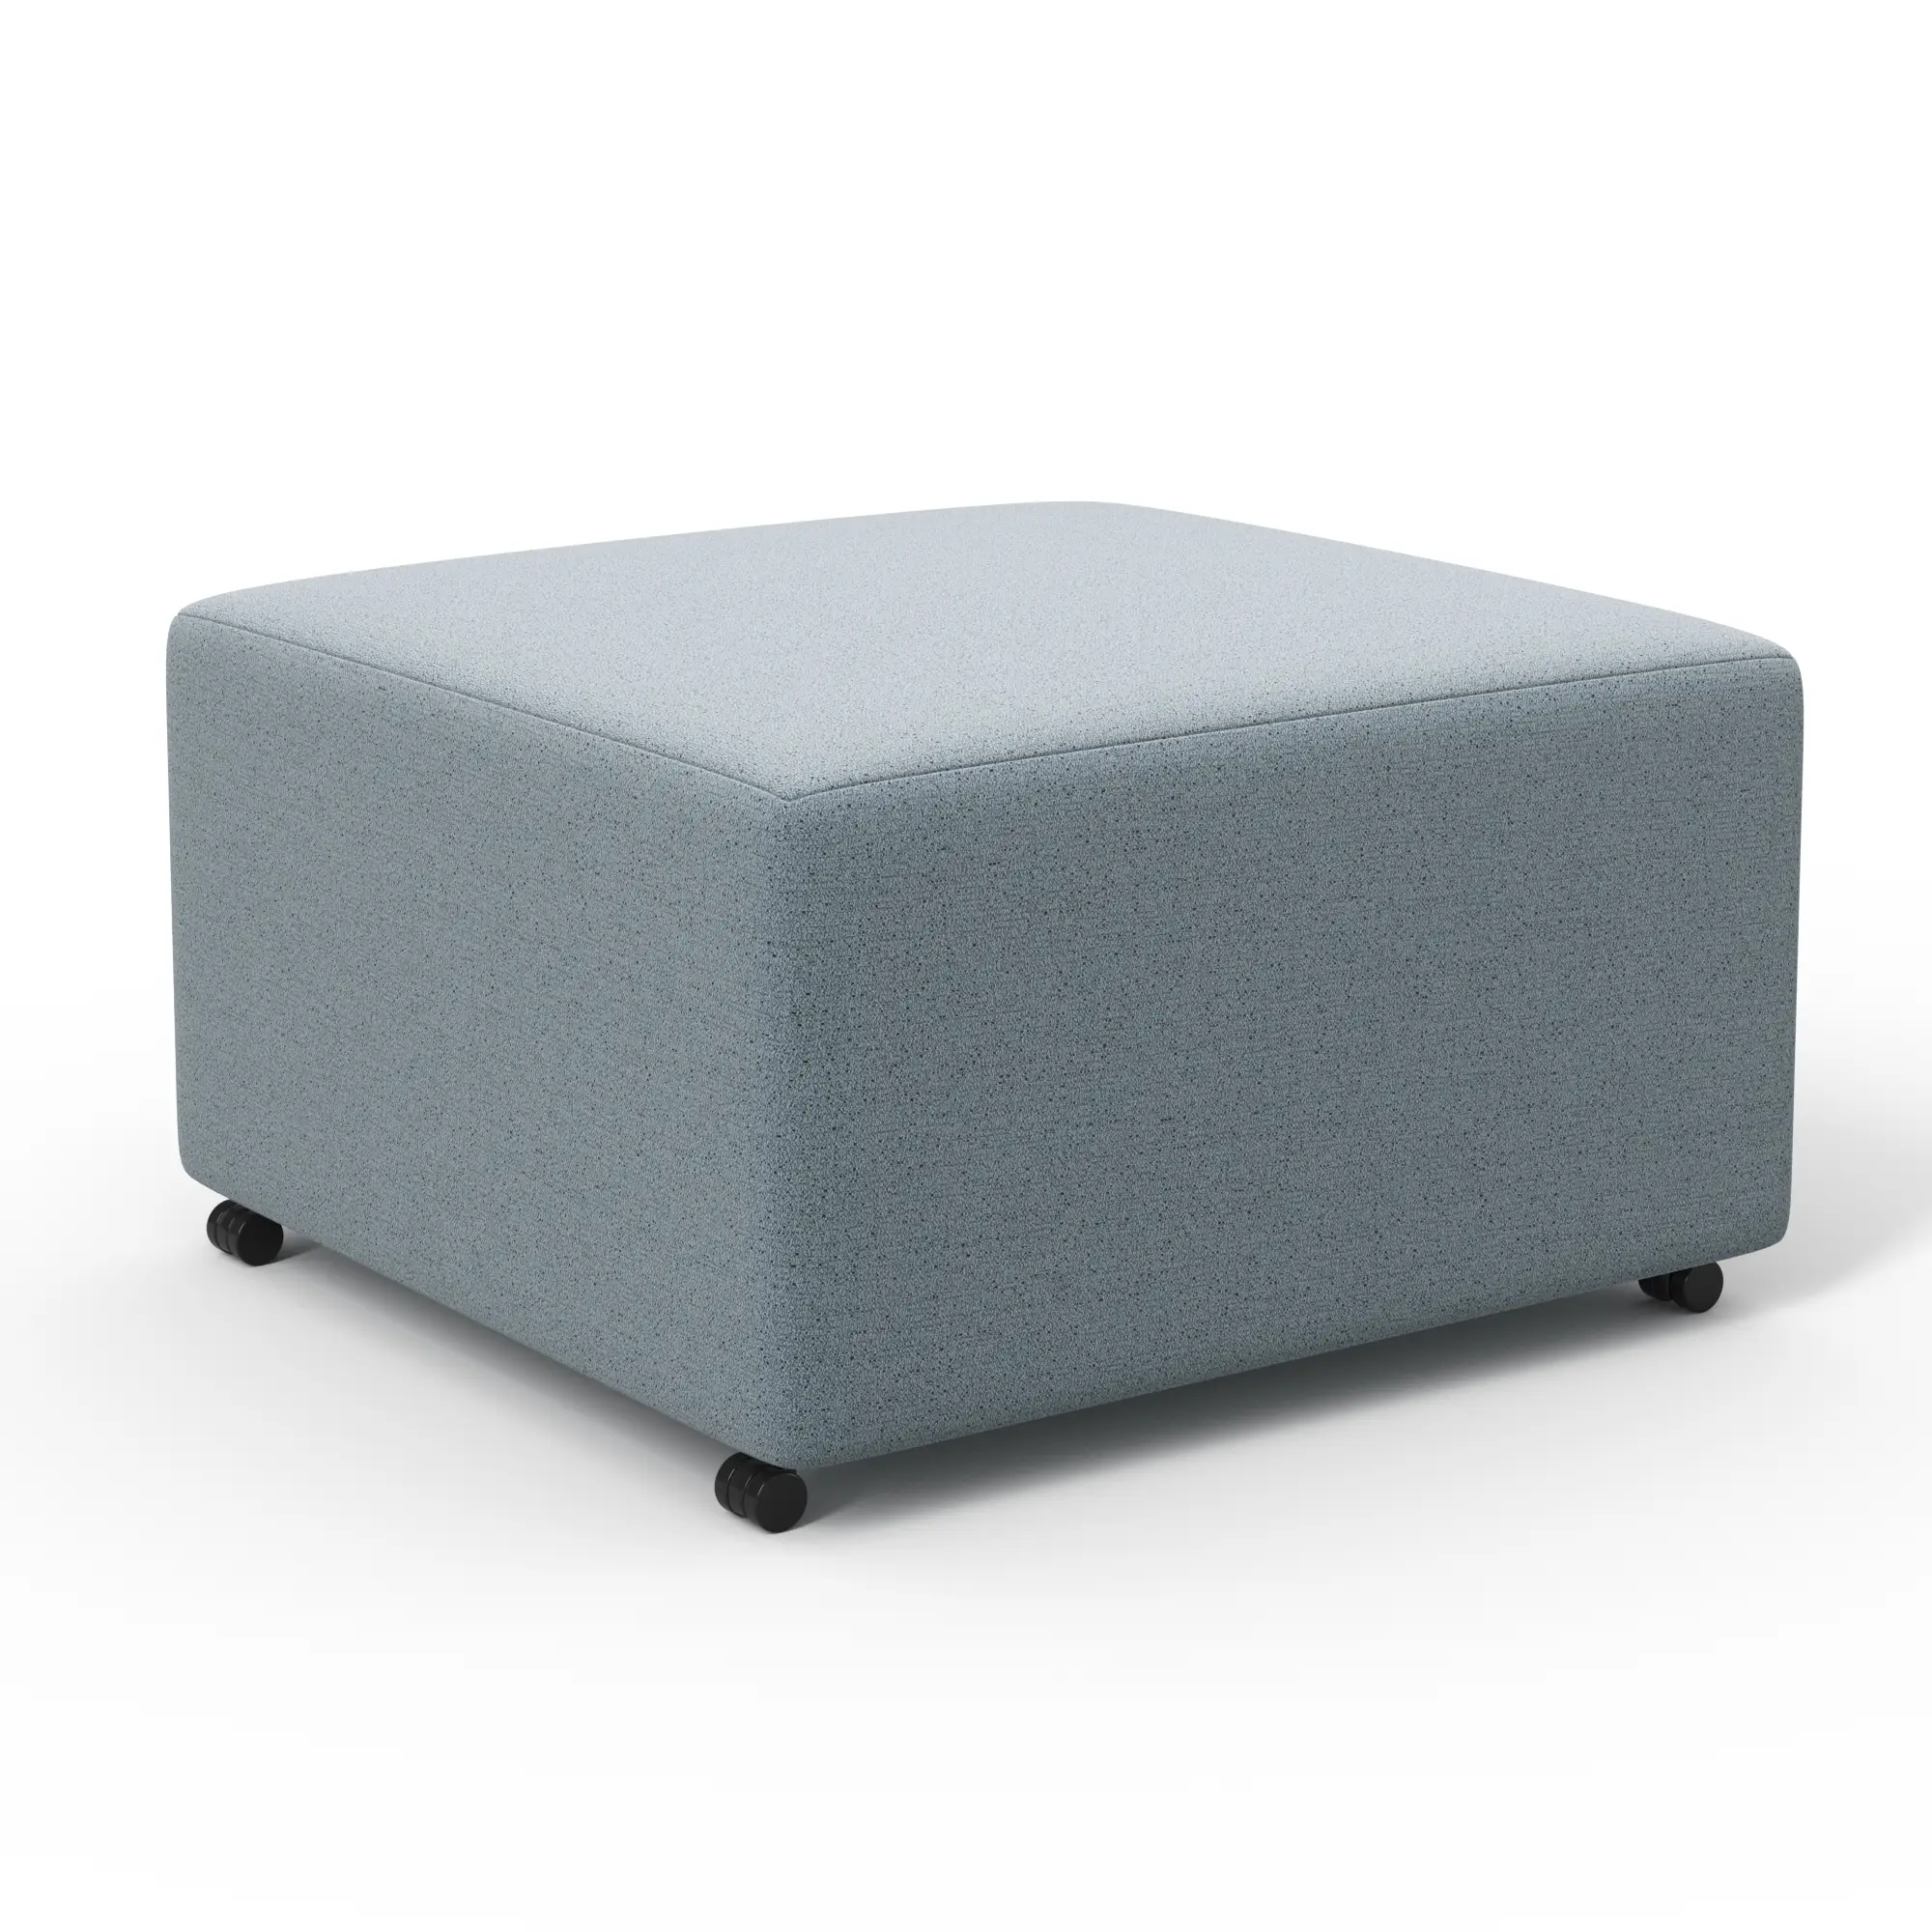 Figuro Ottoman With Casters